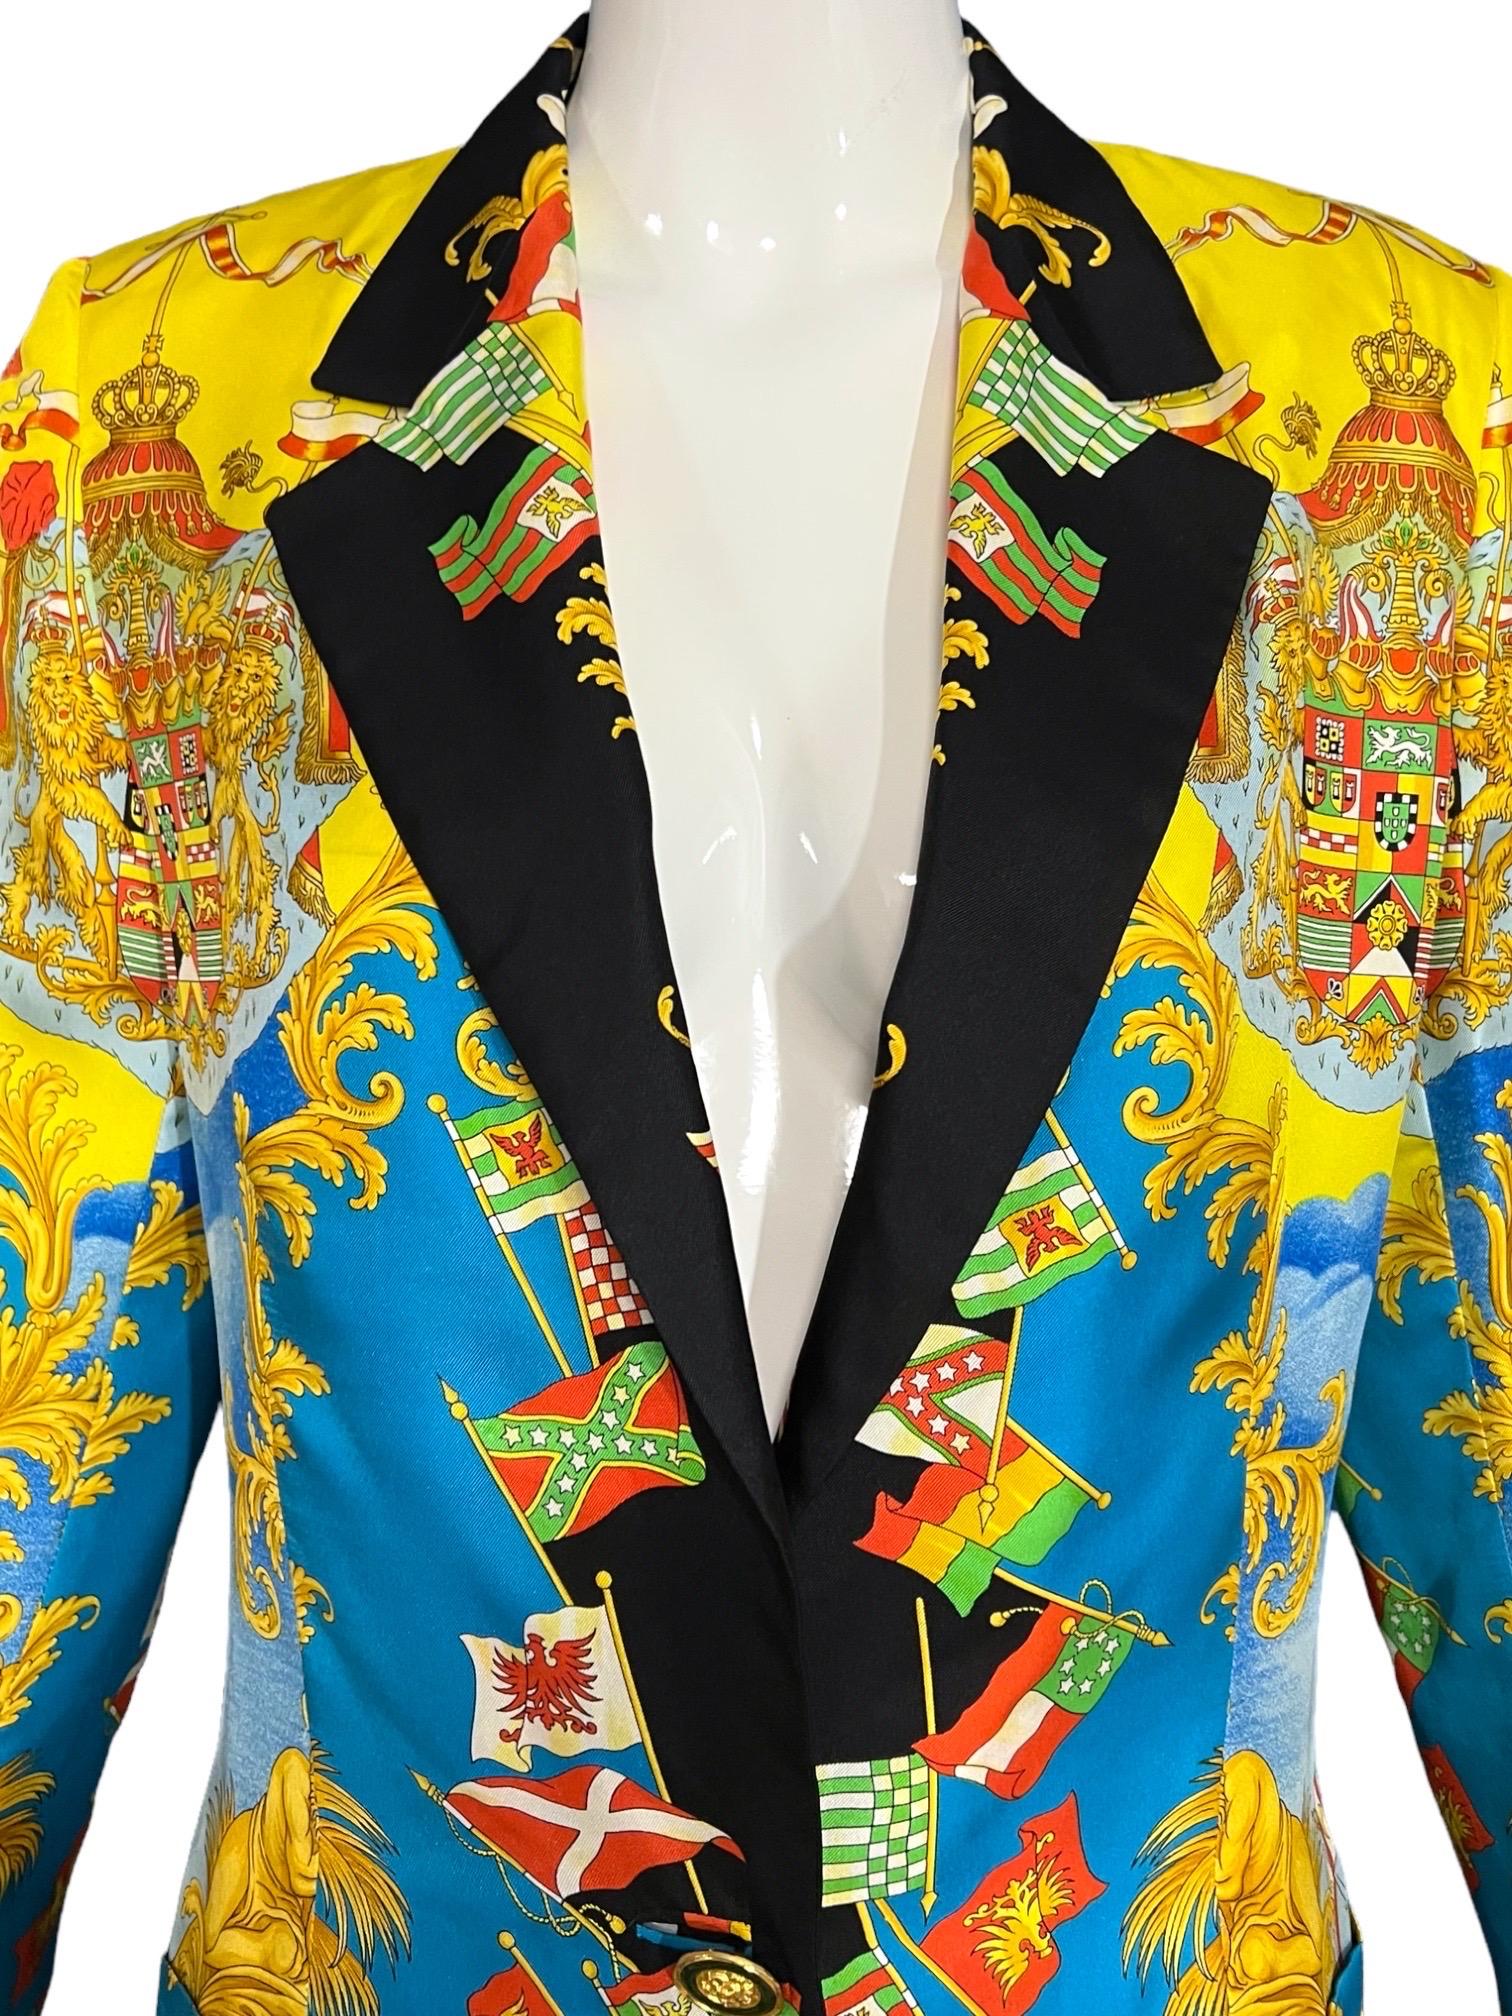 Blue S/S 1993 Gianni Versace Baroque Flags Silk Blazer Jacket Miami Collection  For Sale